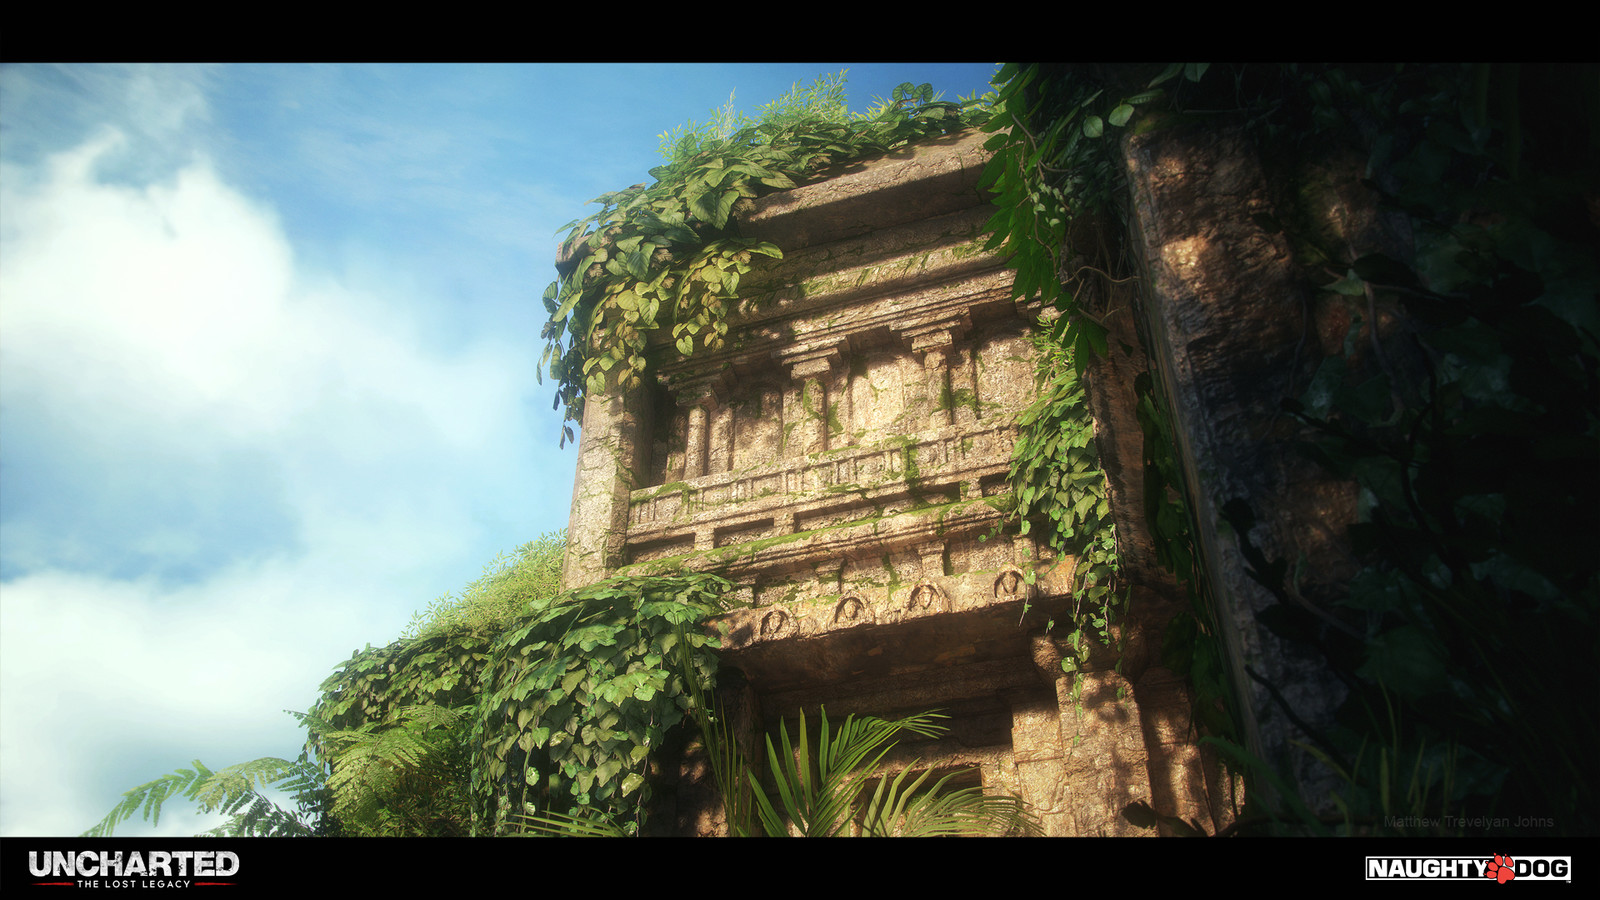 *foliage placement and shader blends really break up the repetition when using modular assets*